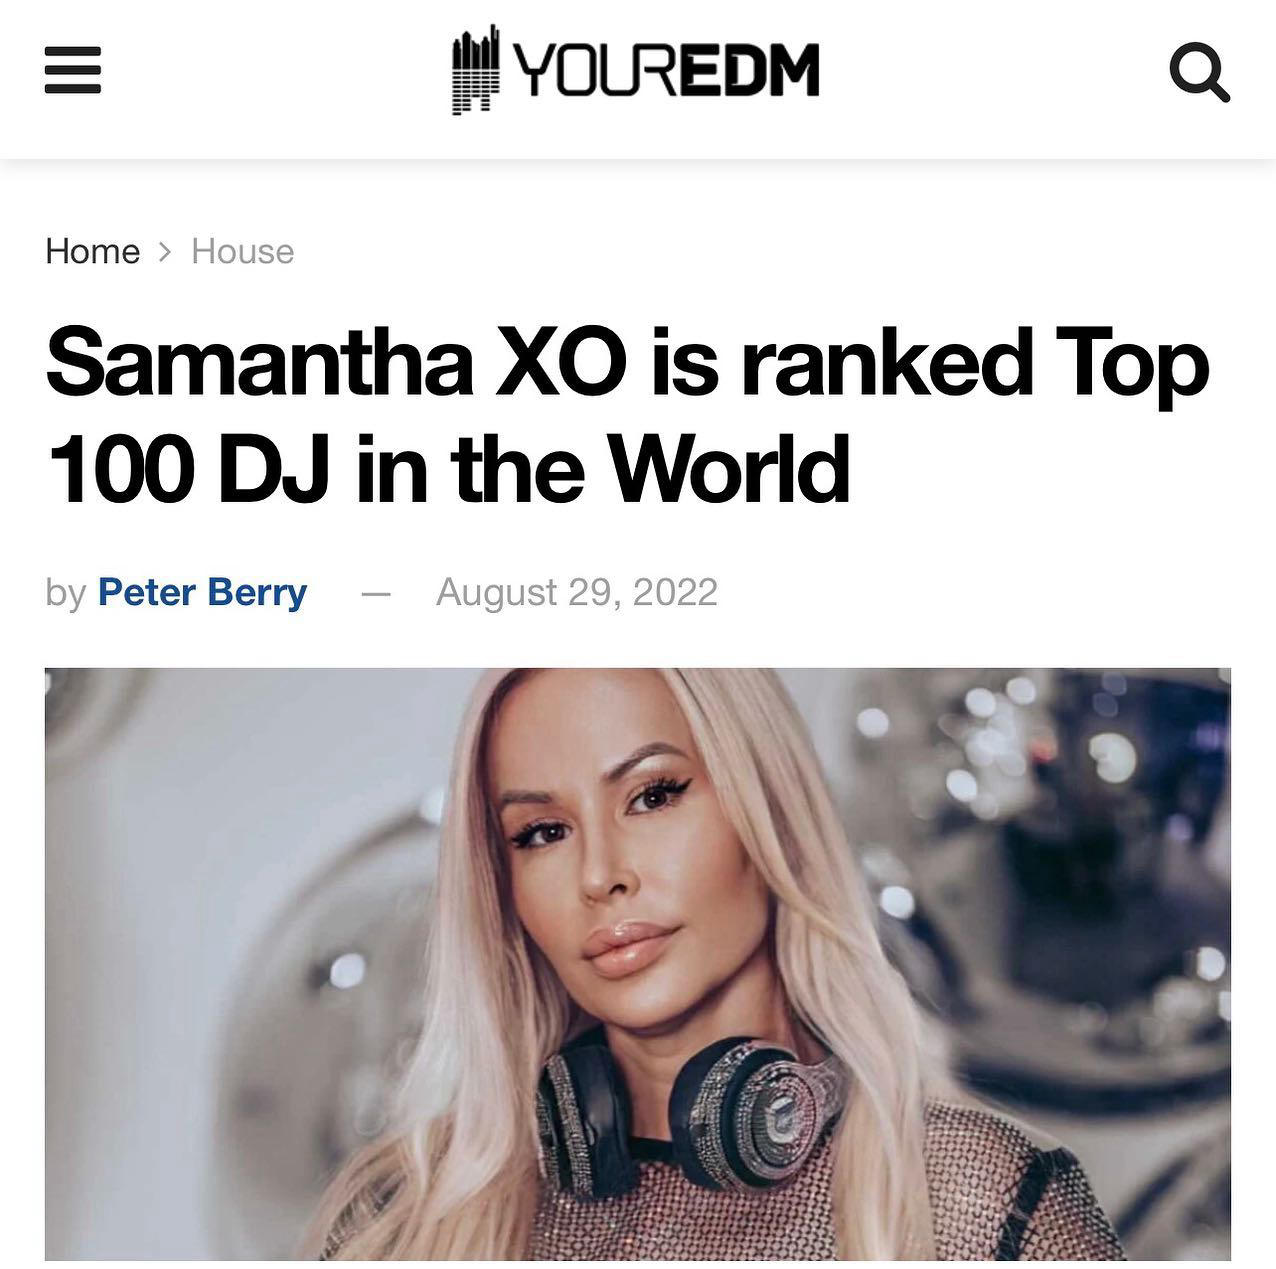 Samantha XO - A very proud moment for myself